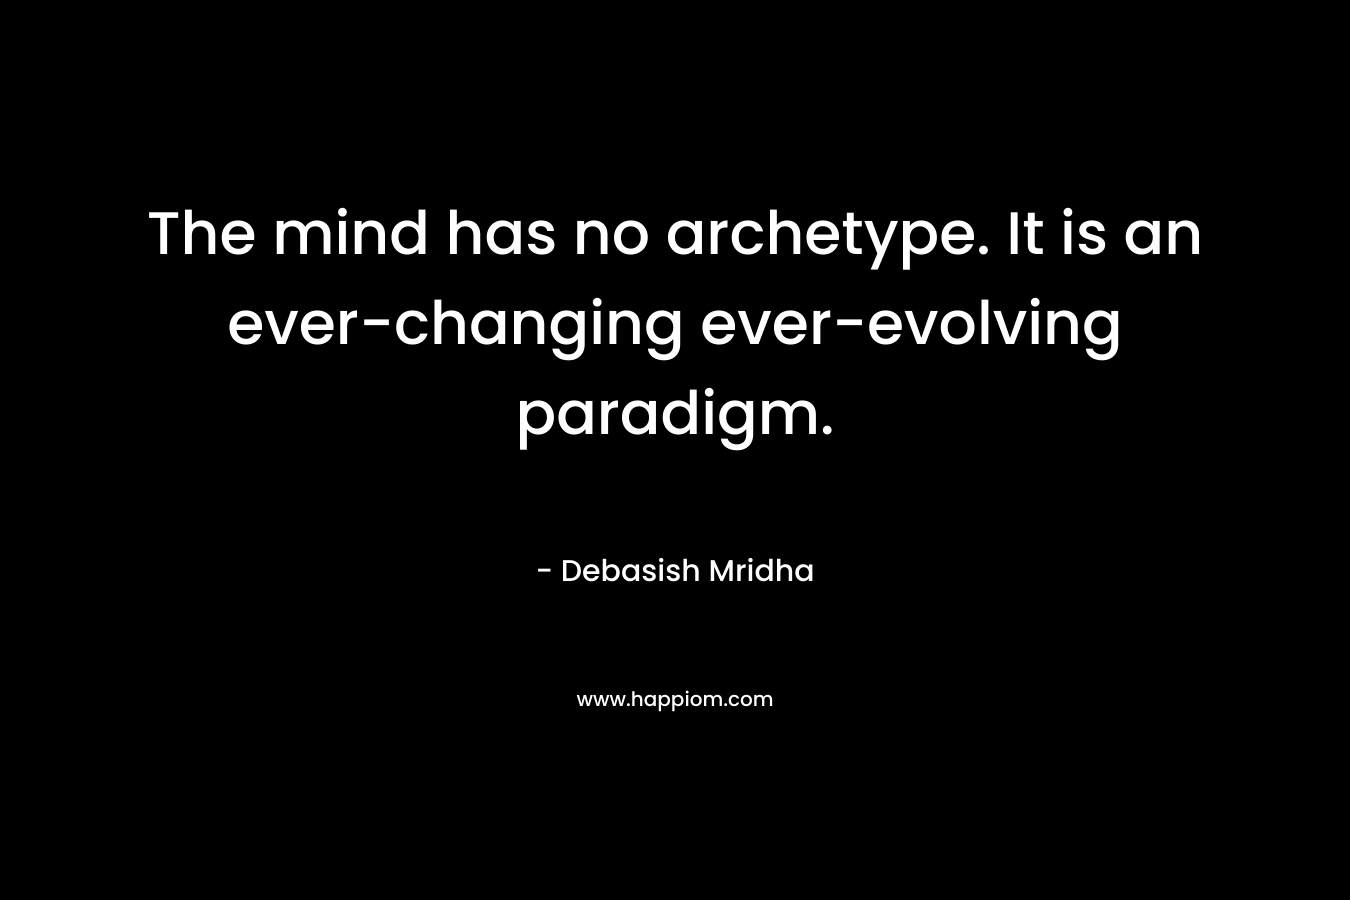 The mind has no archetype. It is an ever-changing ever-evolving paradigm.